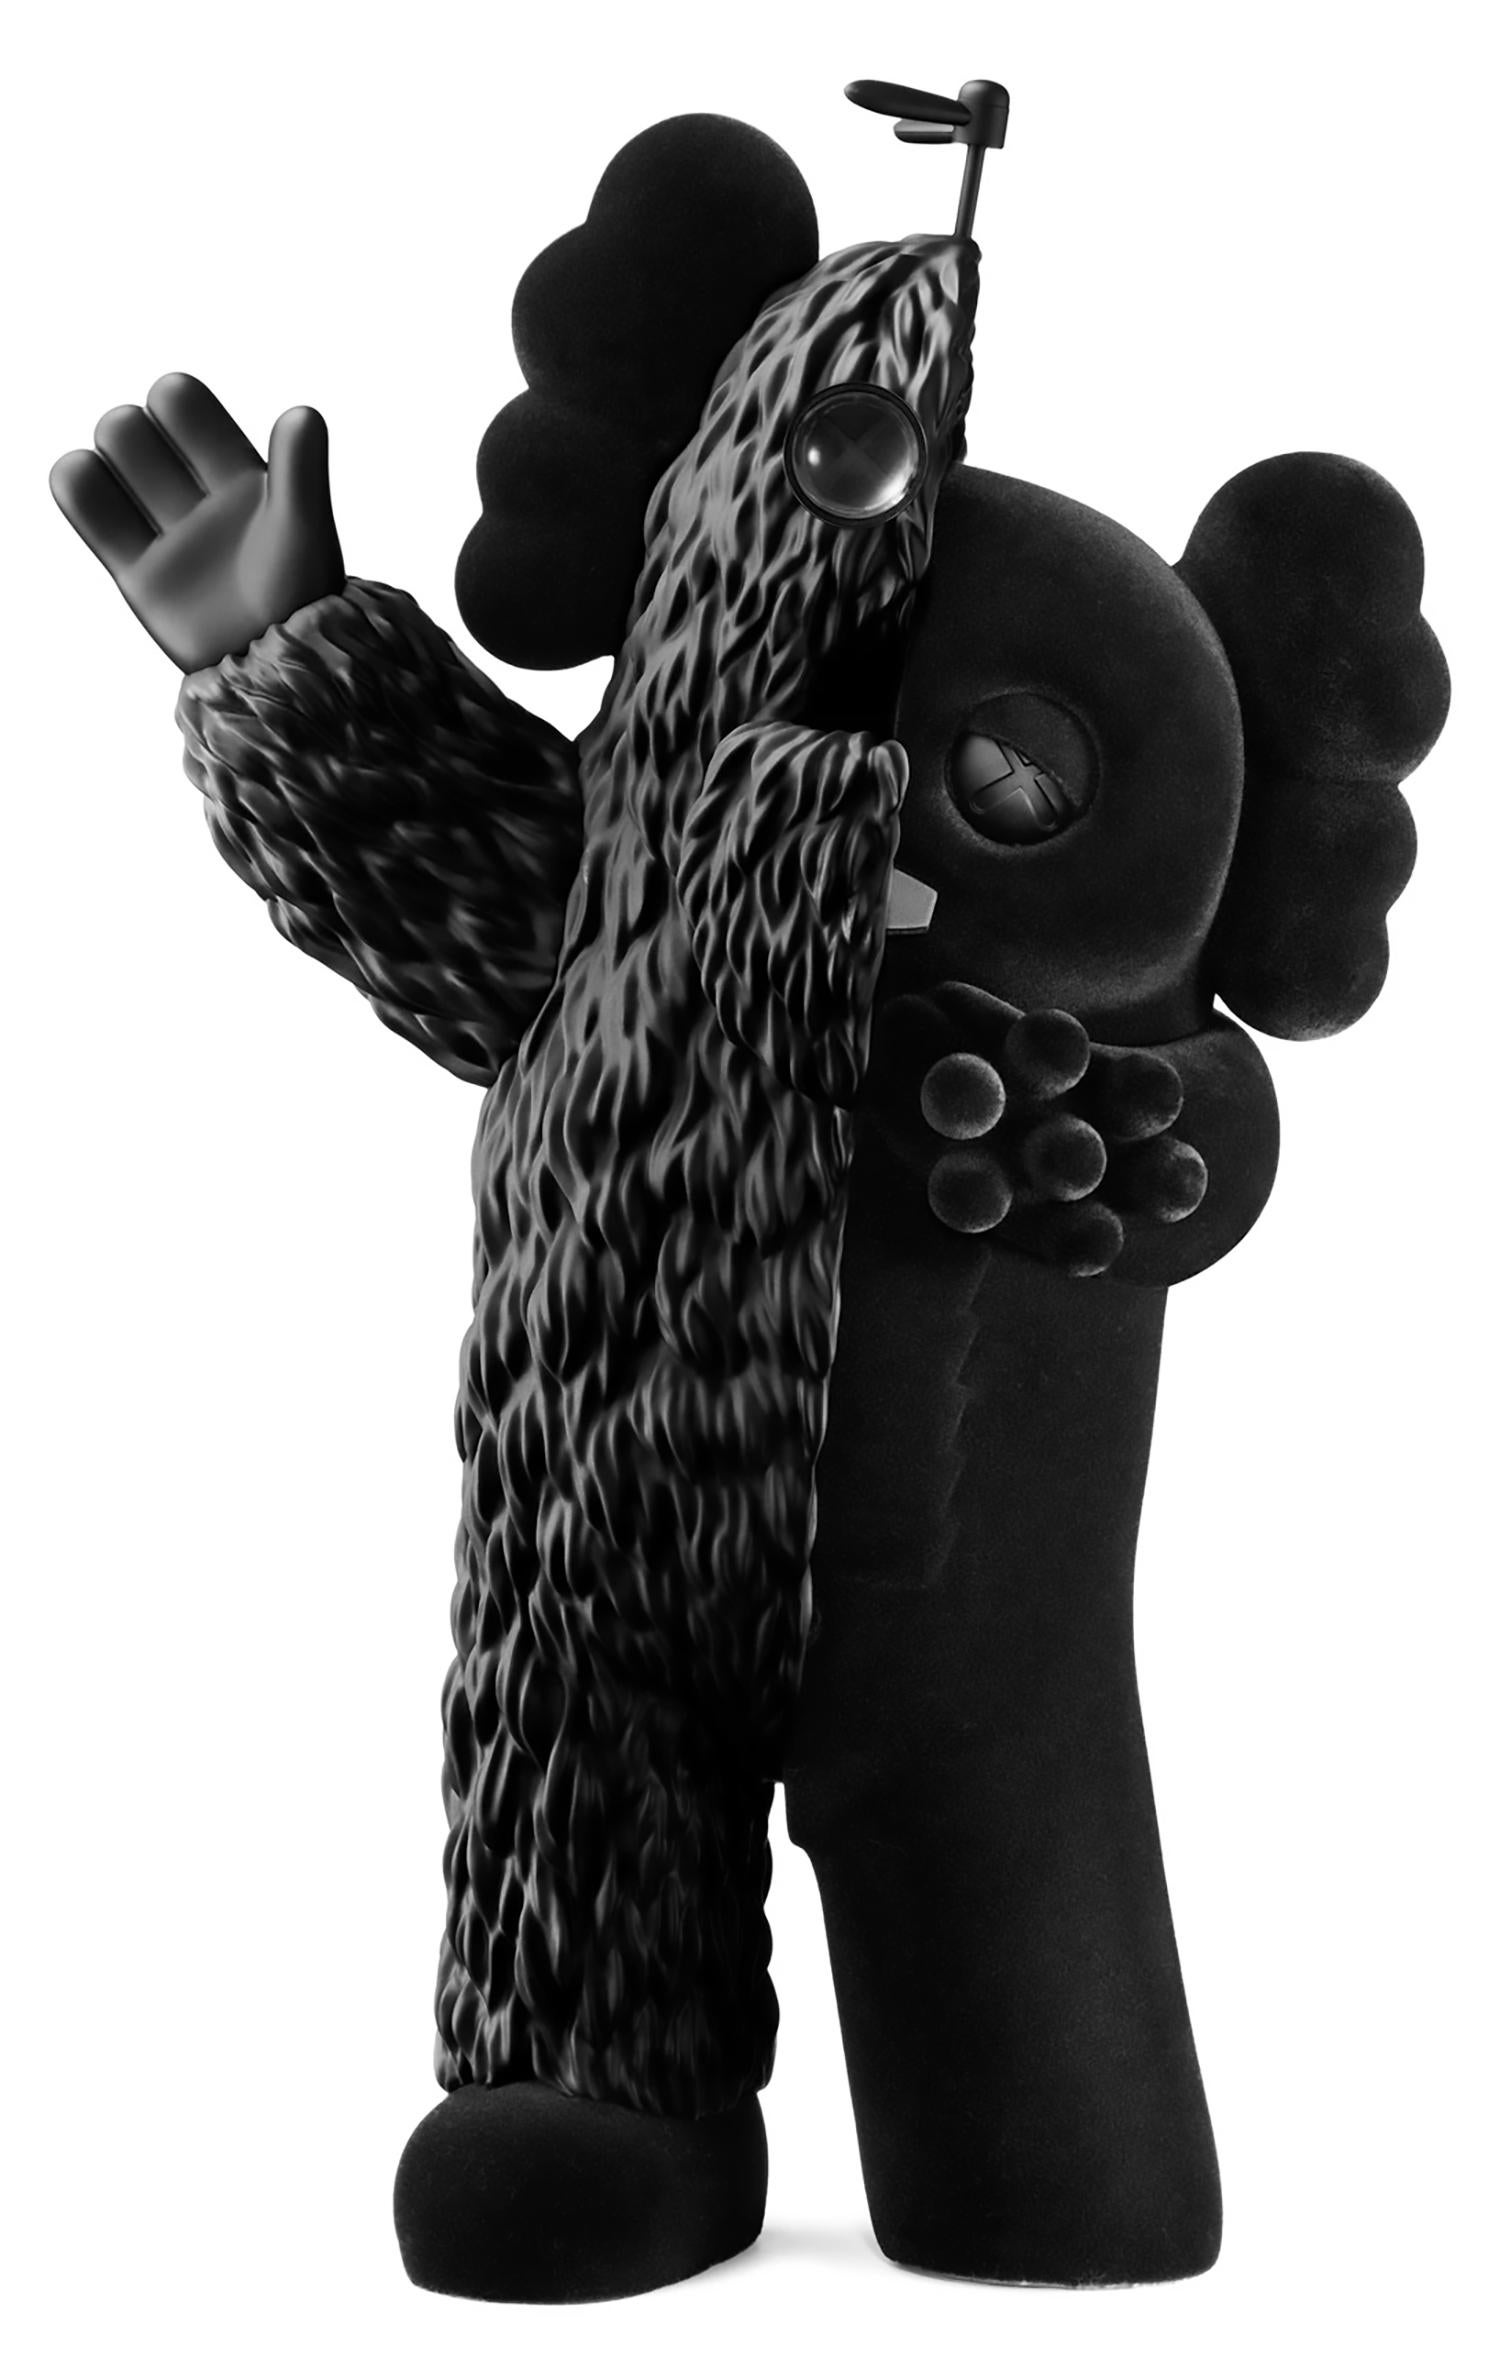 KAWS Kachamukku 2022:  
KAWS Kachamukku was born out of a unique collaboration between KAWS and the popular children’s Japanese Sesame Street equivalent, Hirake! Ponkikki. Here KAWS combines & splits the show’s two main characters down the middle